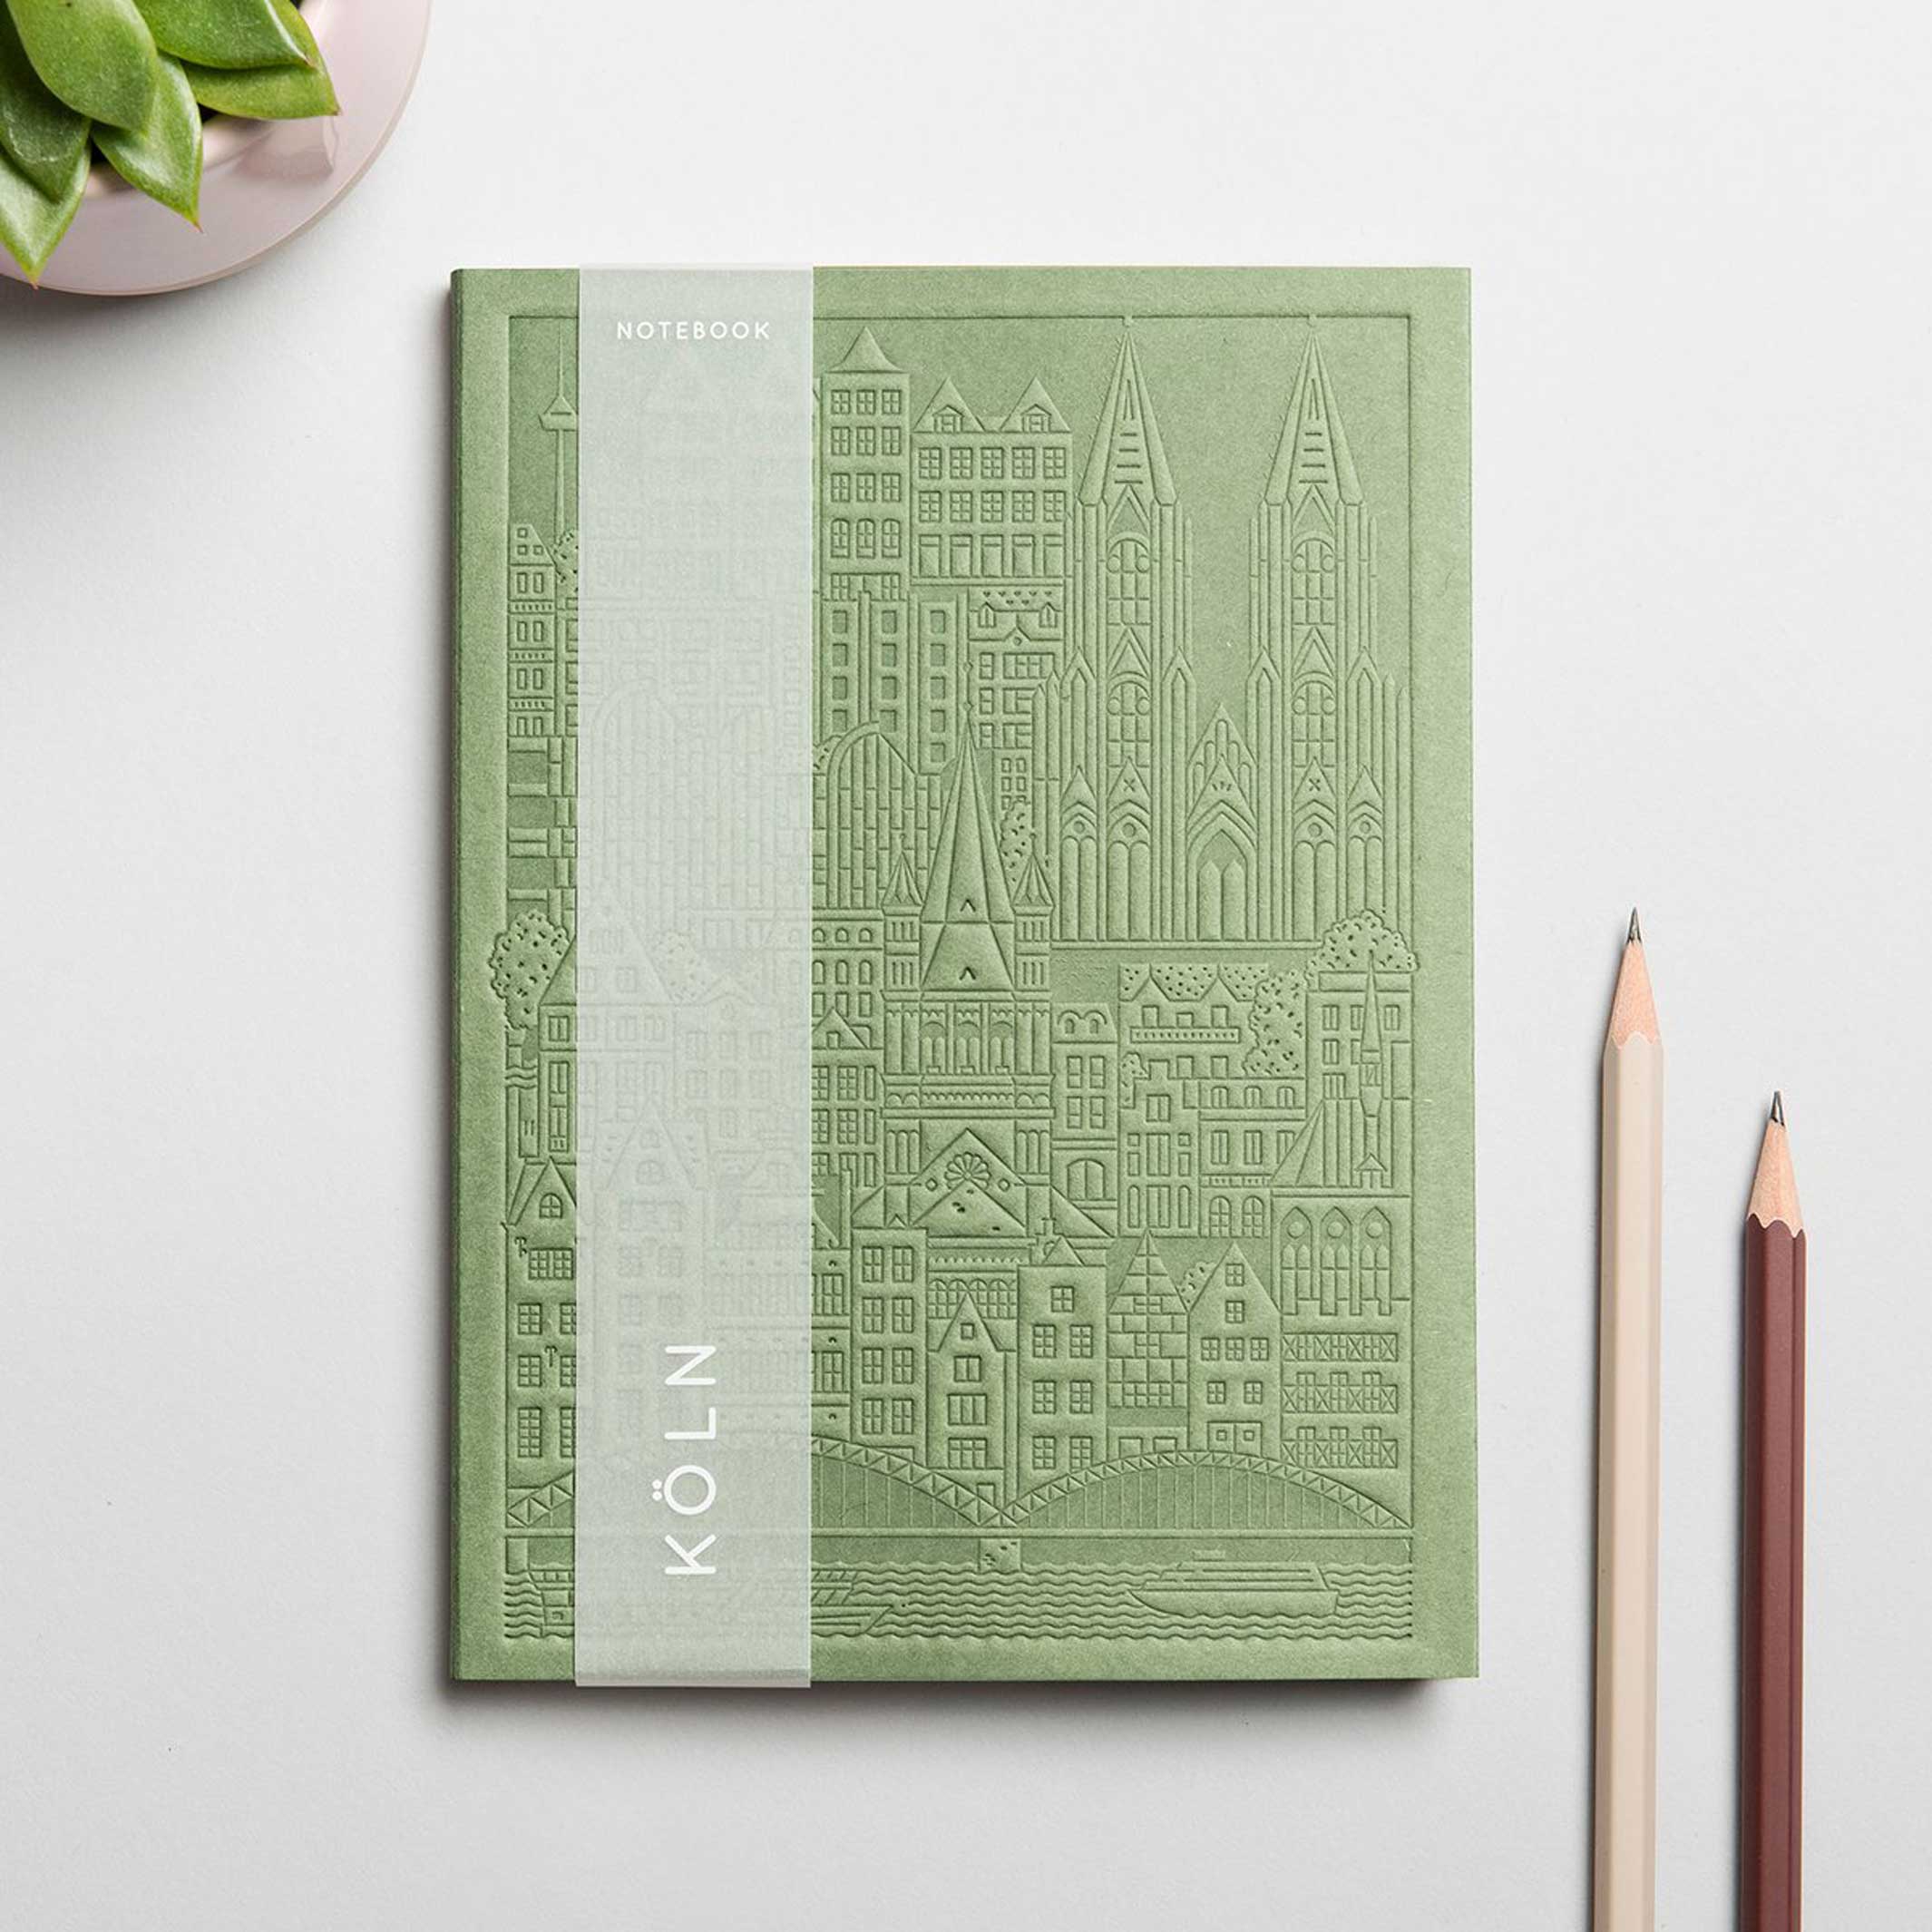 COLOGNE NOTEBOOK | 18x13 cm & 128 pages | the city works